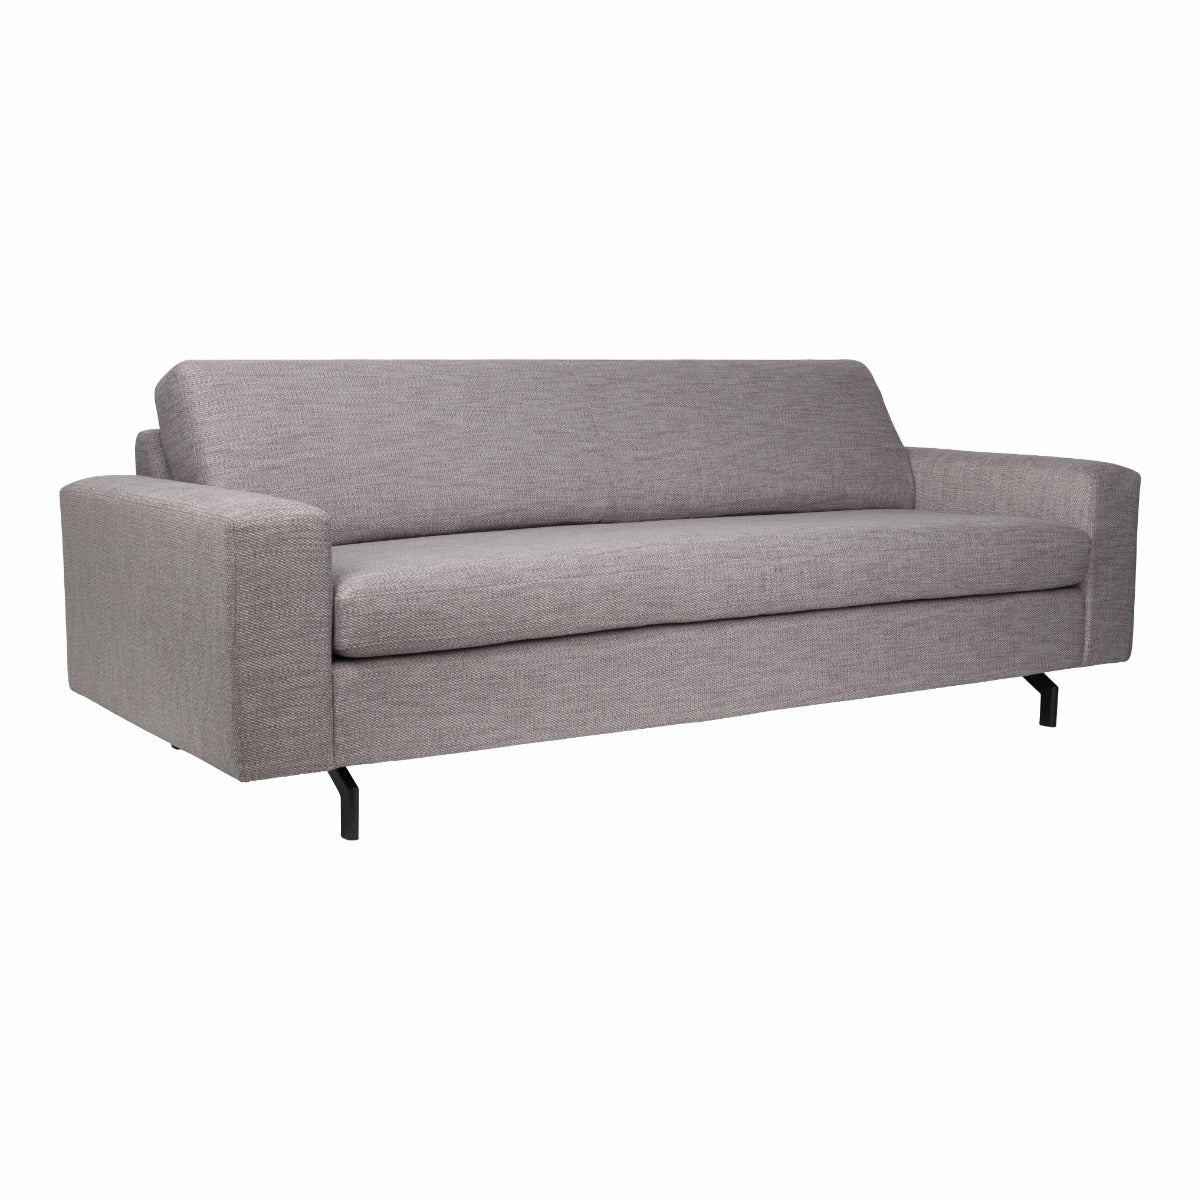 The Jean sofa is a piece of furniture from which simplicity beats, which is so rare nowadays. Its additional advantage is the elegance and comfort that it provides during use, which makes it great in a classic office and a minimalist living room. The cover is made of high quality fabric, thanks to which it provides unearthly softness. Small steel legs, which are barely noticeable, give it even more style.